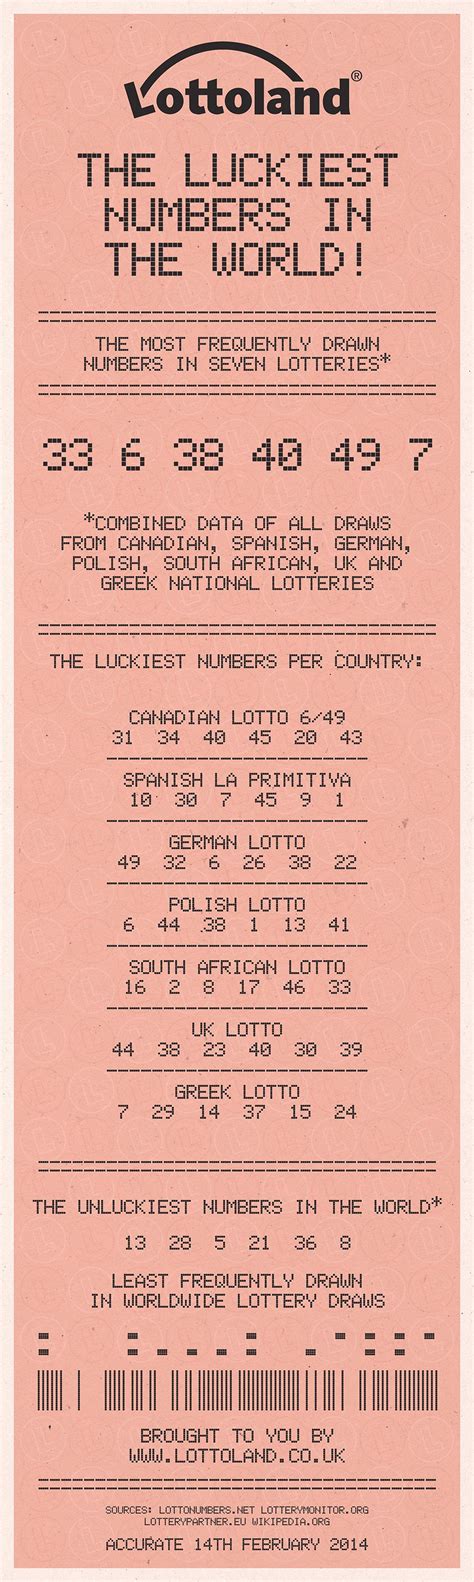 Lotto Numbers, Winning Lottery Numbers, Lucky Numbers For Lottery, Lottery Winner, Winning The ...